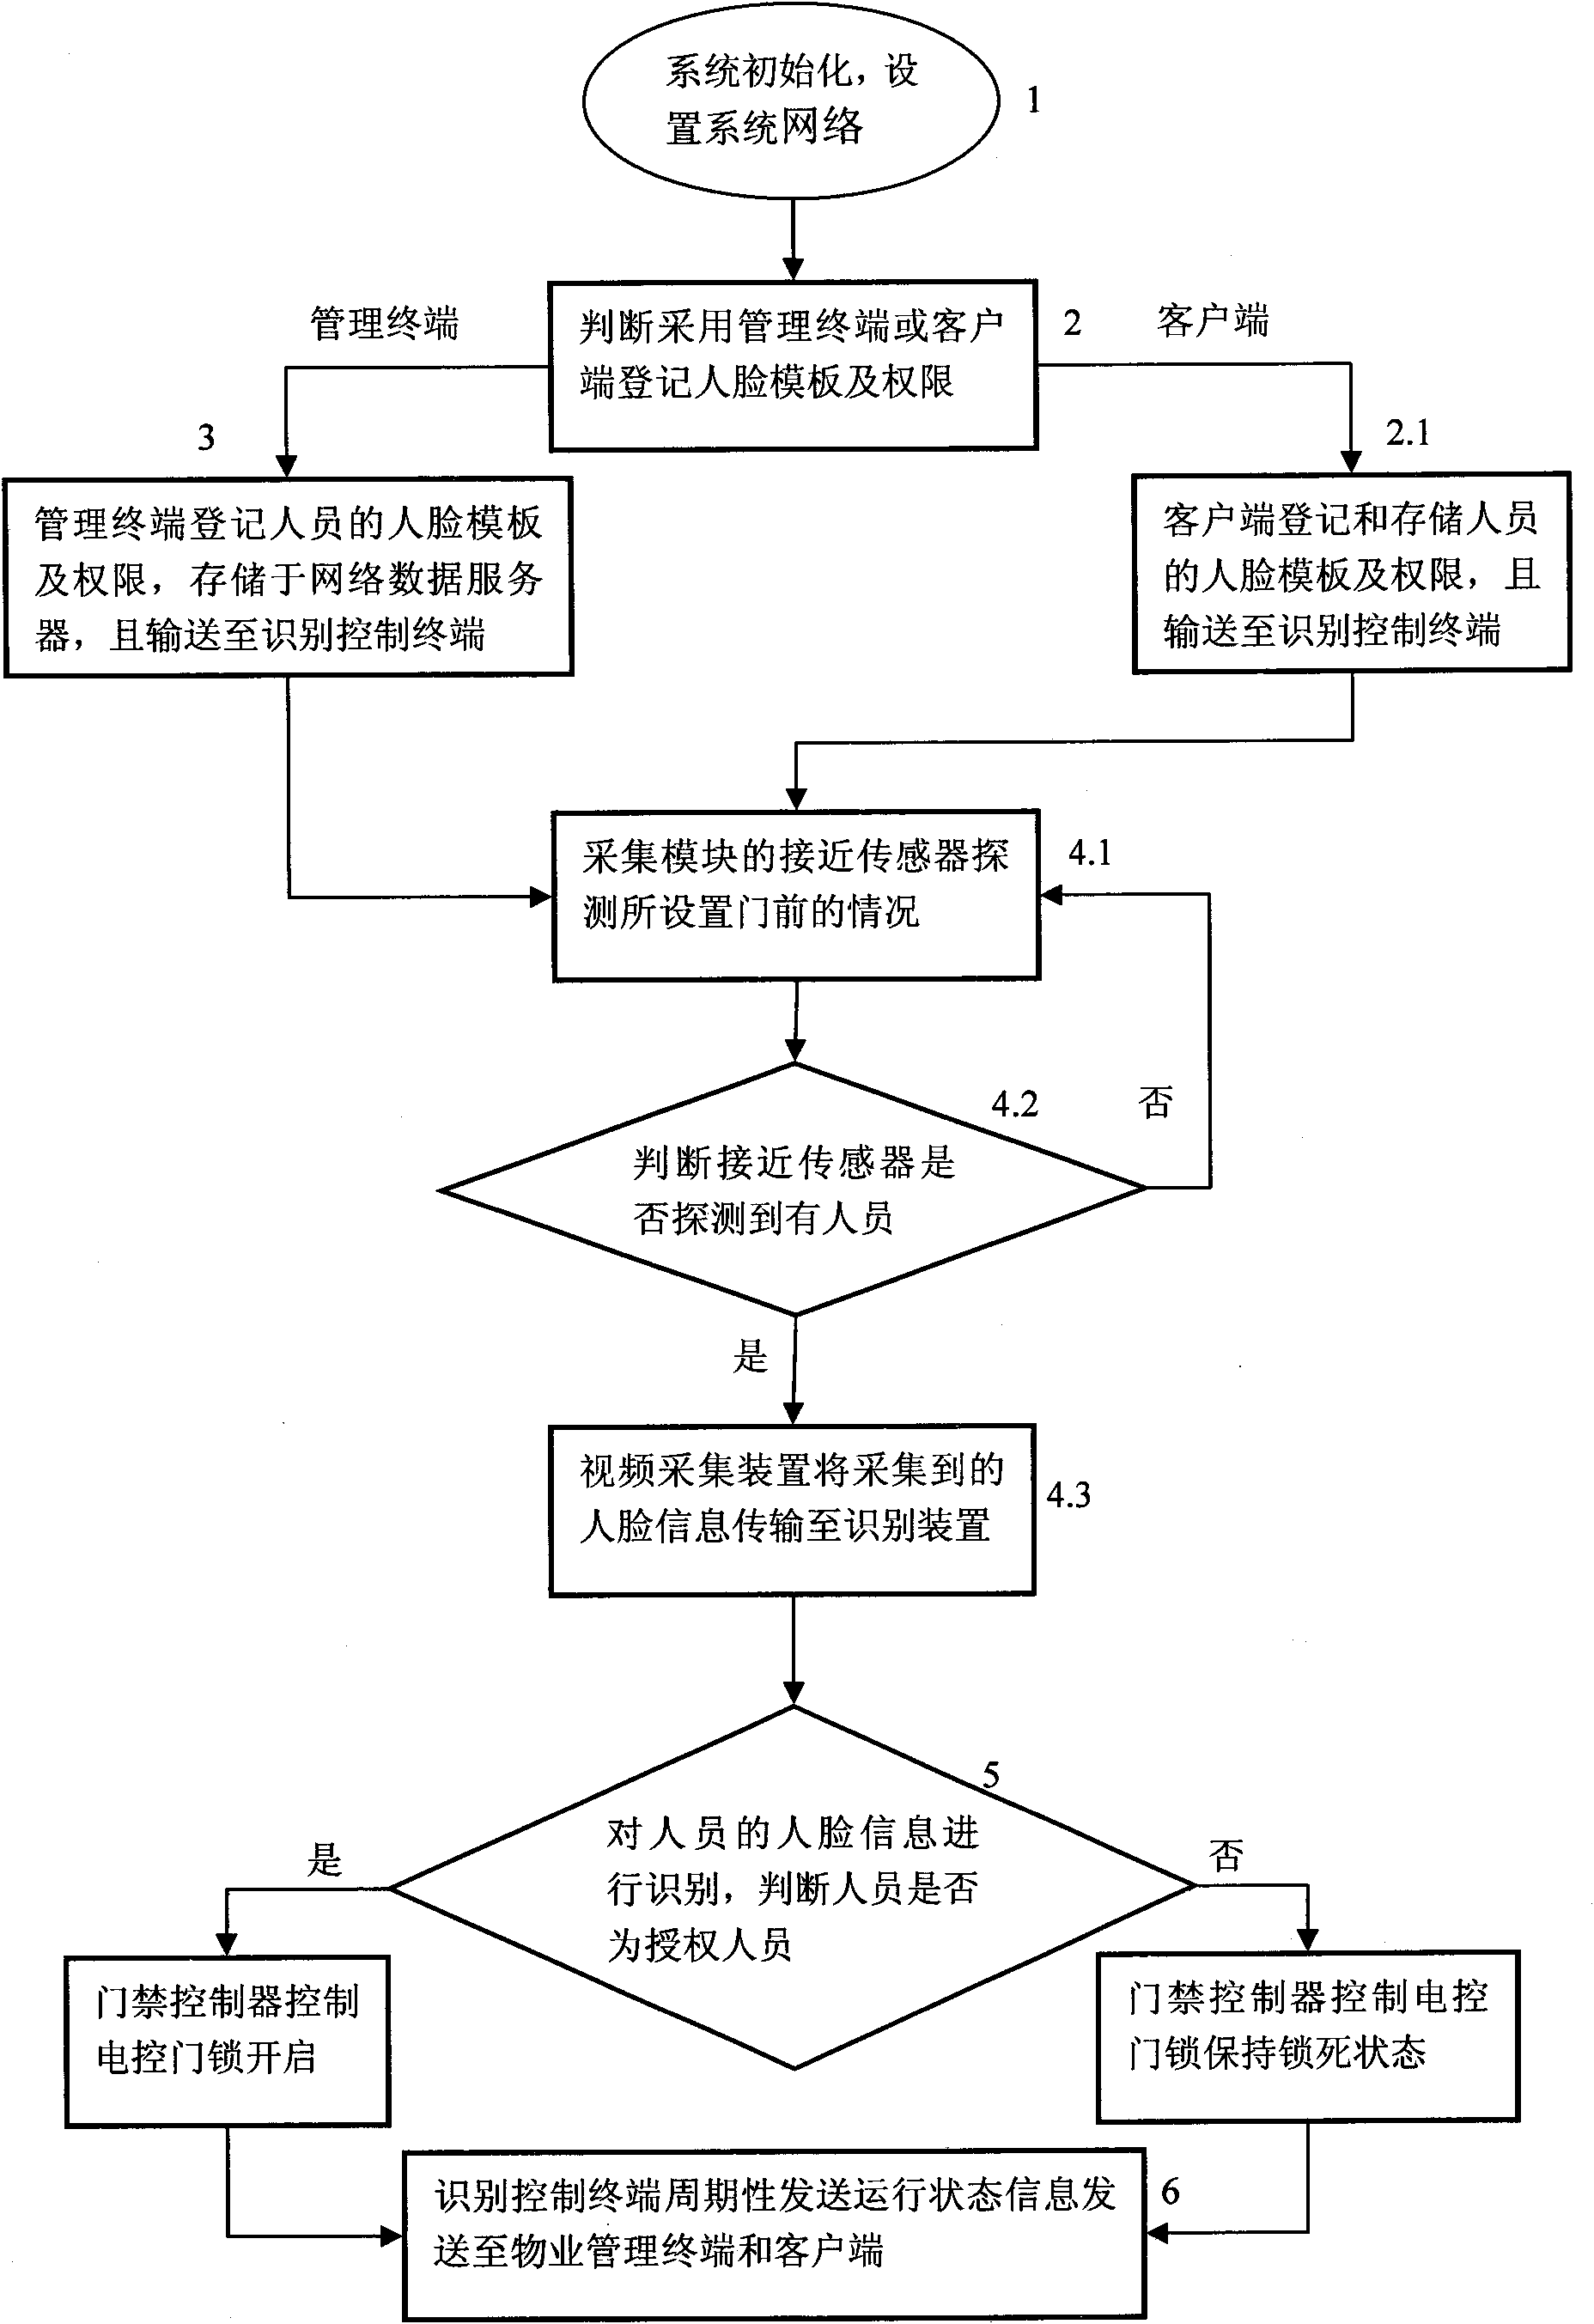 Network human face recognition system with intelligent management system and recognition method thereof